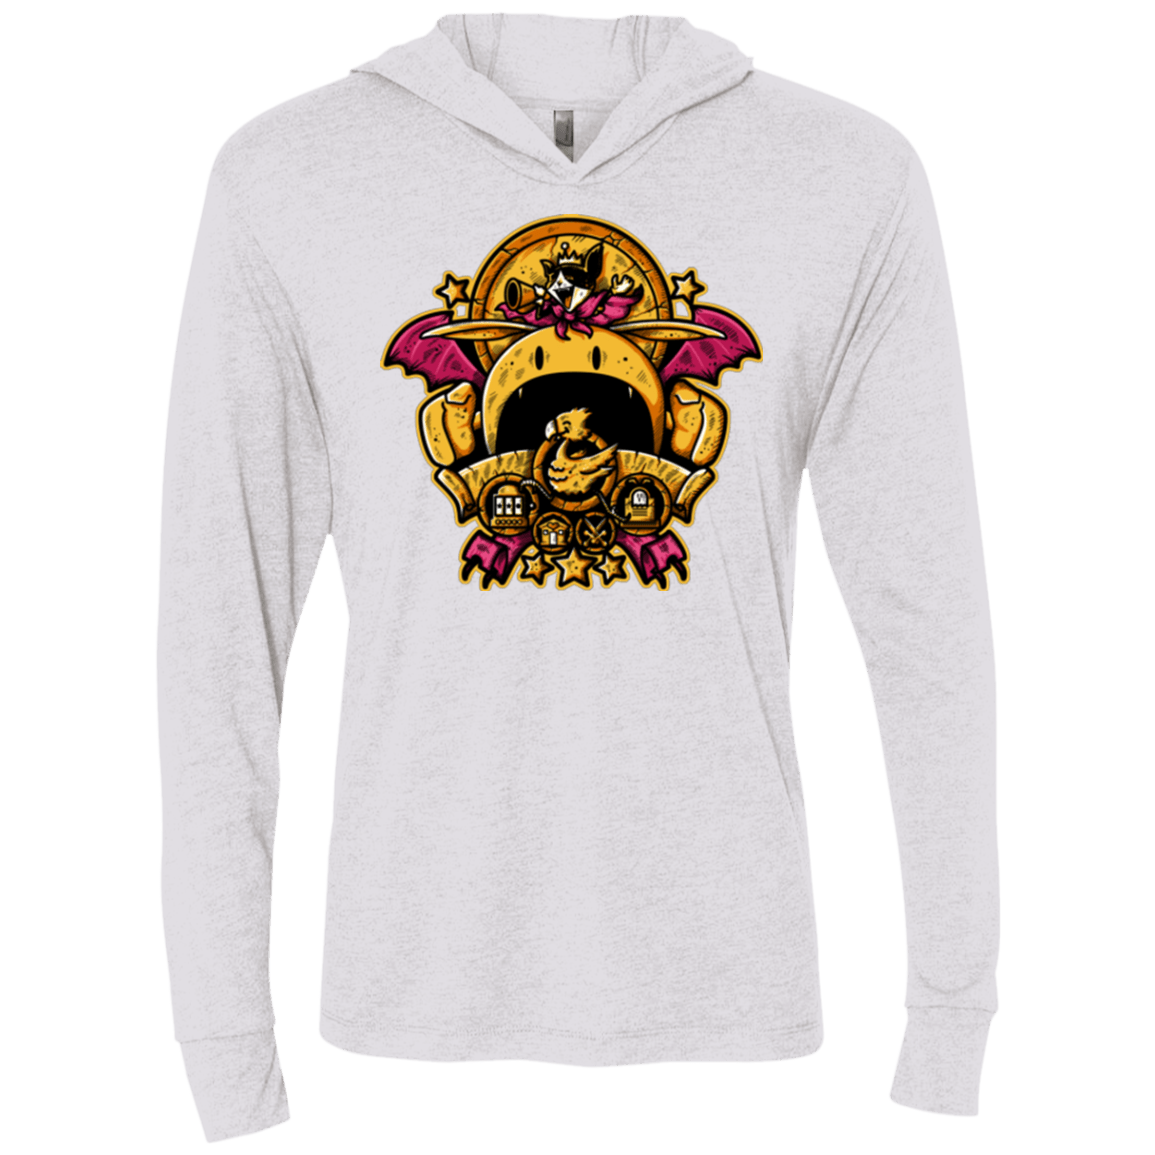 T-Shirts Heather White / X-Small SAUCER CREST Triblend Long Sleeve Hoodie Tee